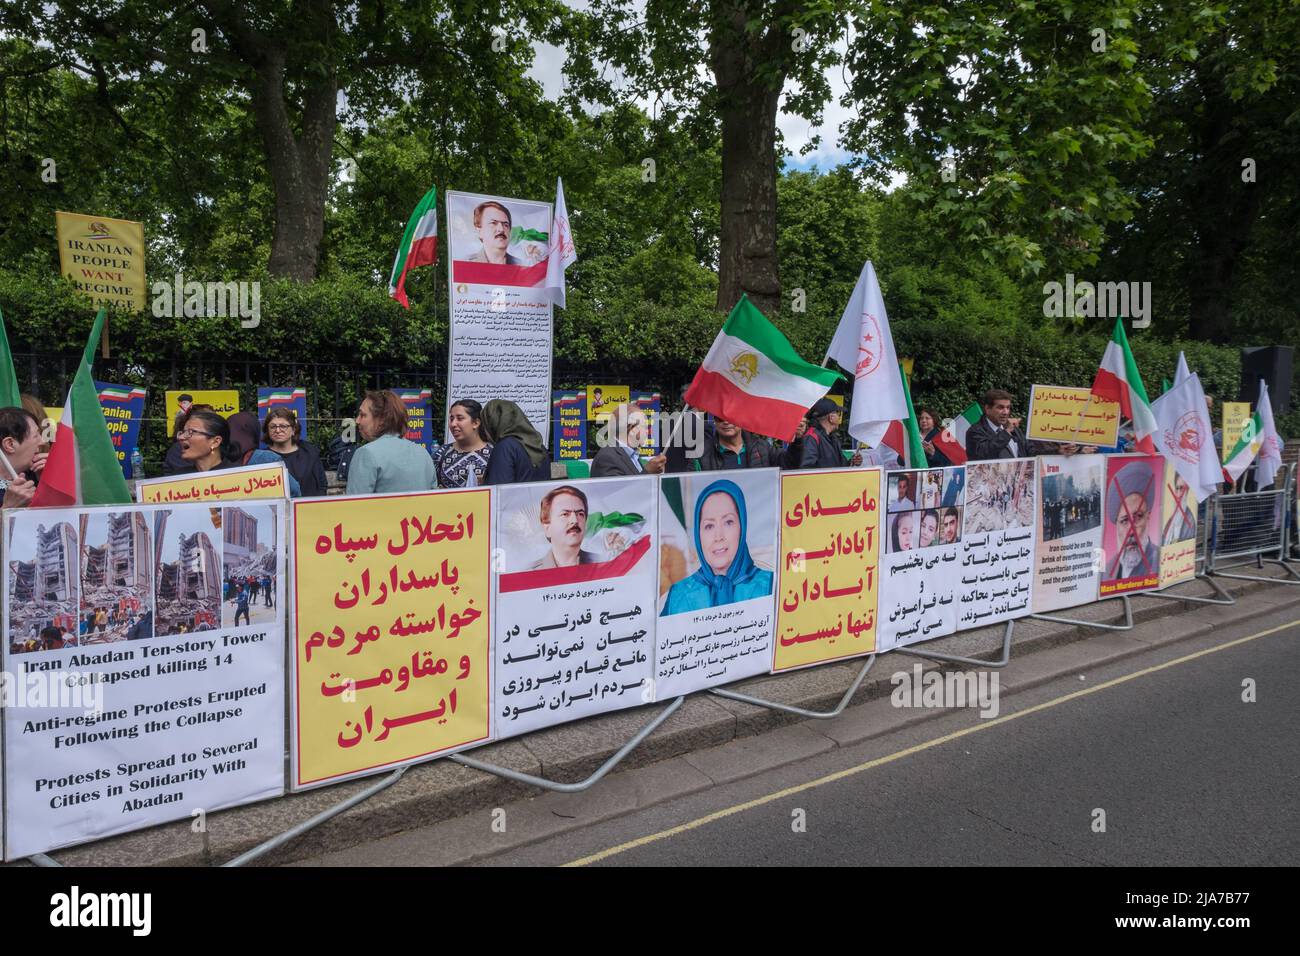 London, UK. 28th May 2022. The Anglo-Iranian community and supporters of the Iranian resistance (NCRI) protest in support of ongoing anti-regime protests in Iran at the Iranian Embassy in London. Popular protests have increased over rapidly increasing prices, calling for pensions increases and against Iran's disastrous financial policies and Iranians continue to demand an end to the religious dictatorship. Protests have taken place in cities across Iran despite repression by the Revolutionary Guards. Peter Marshall /Alamy Live News Stock Photo